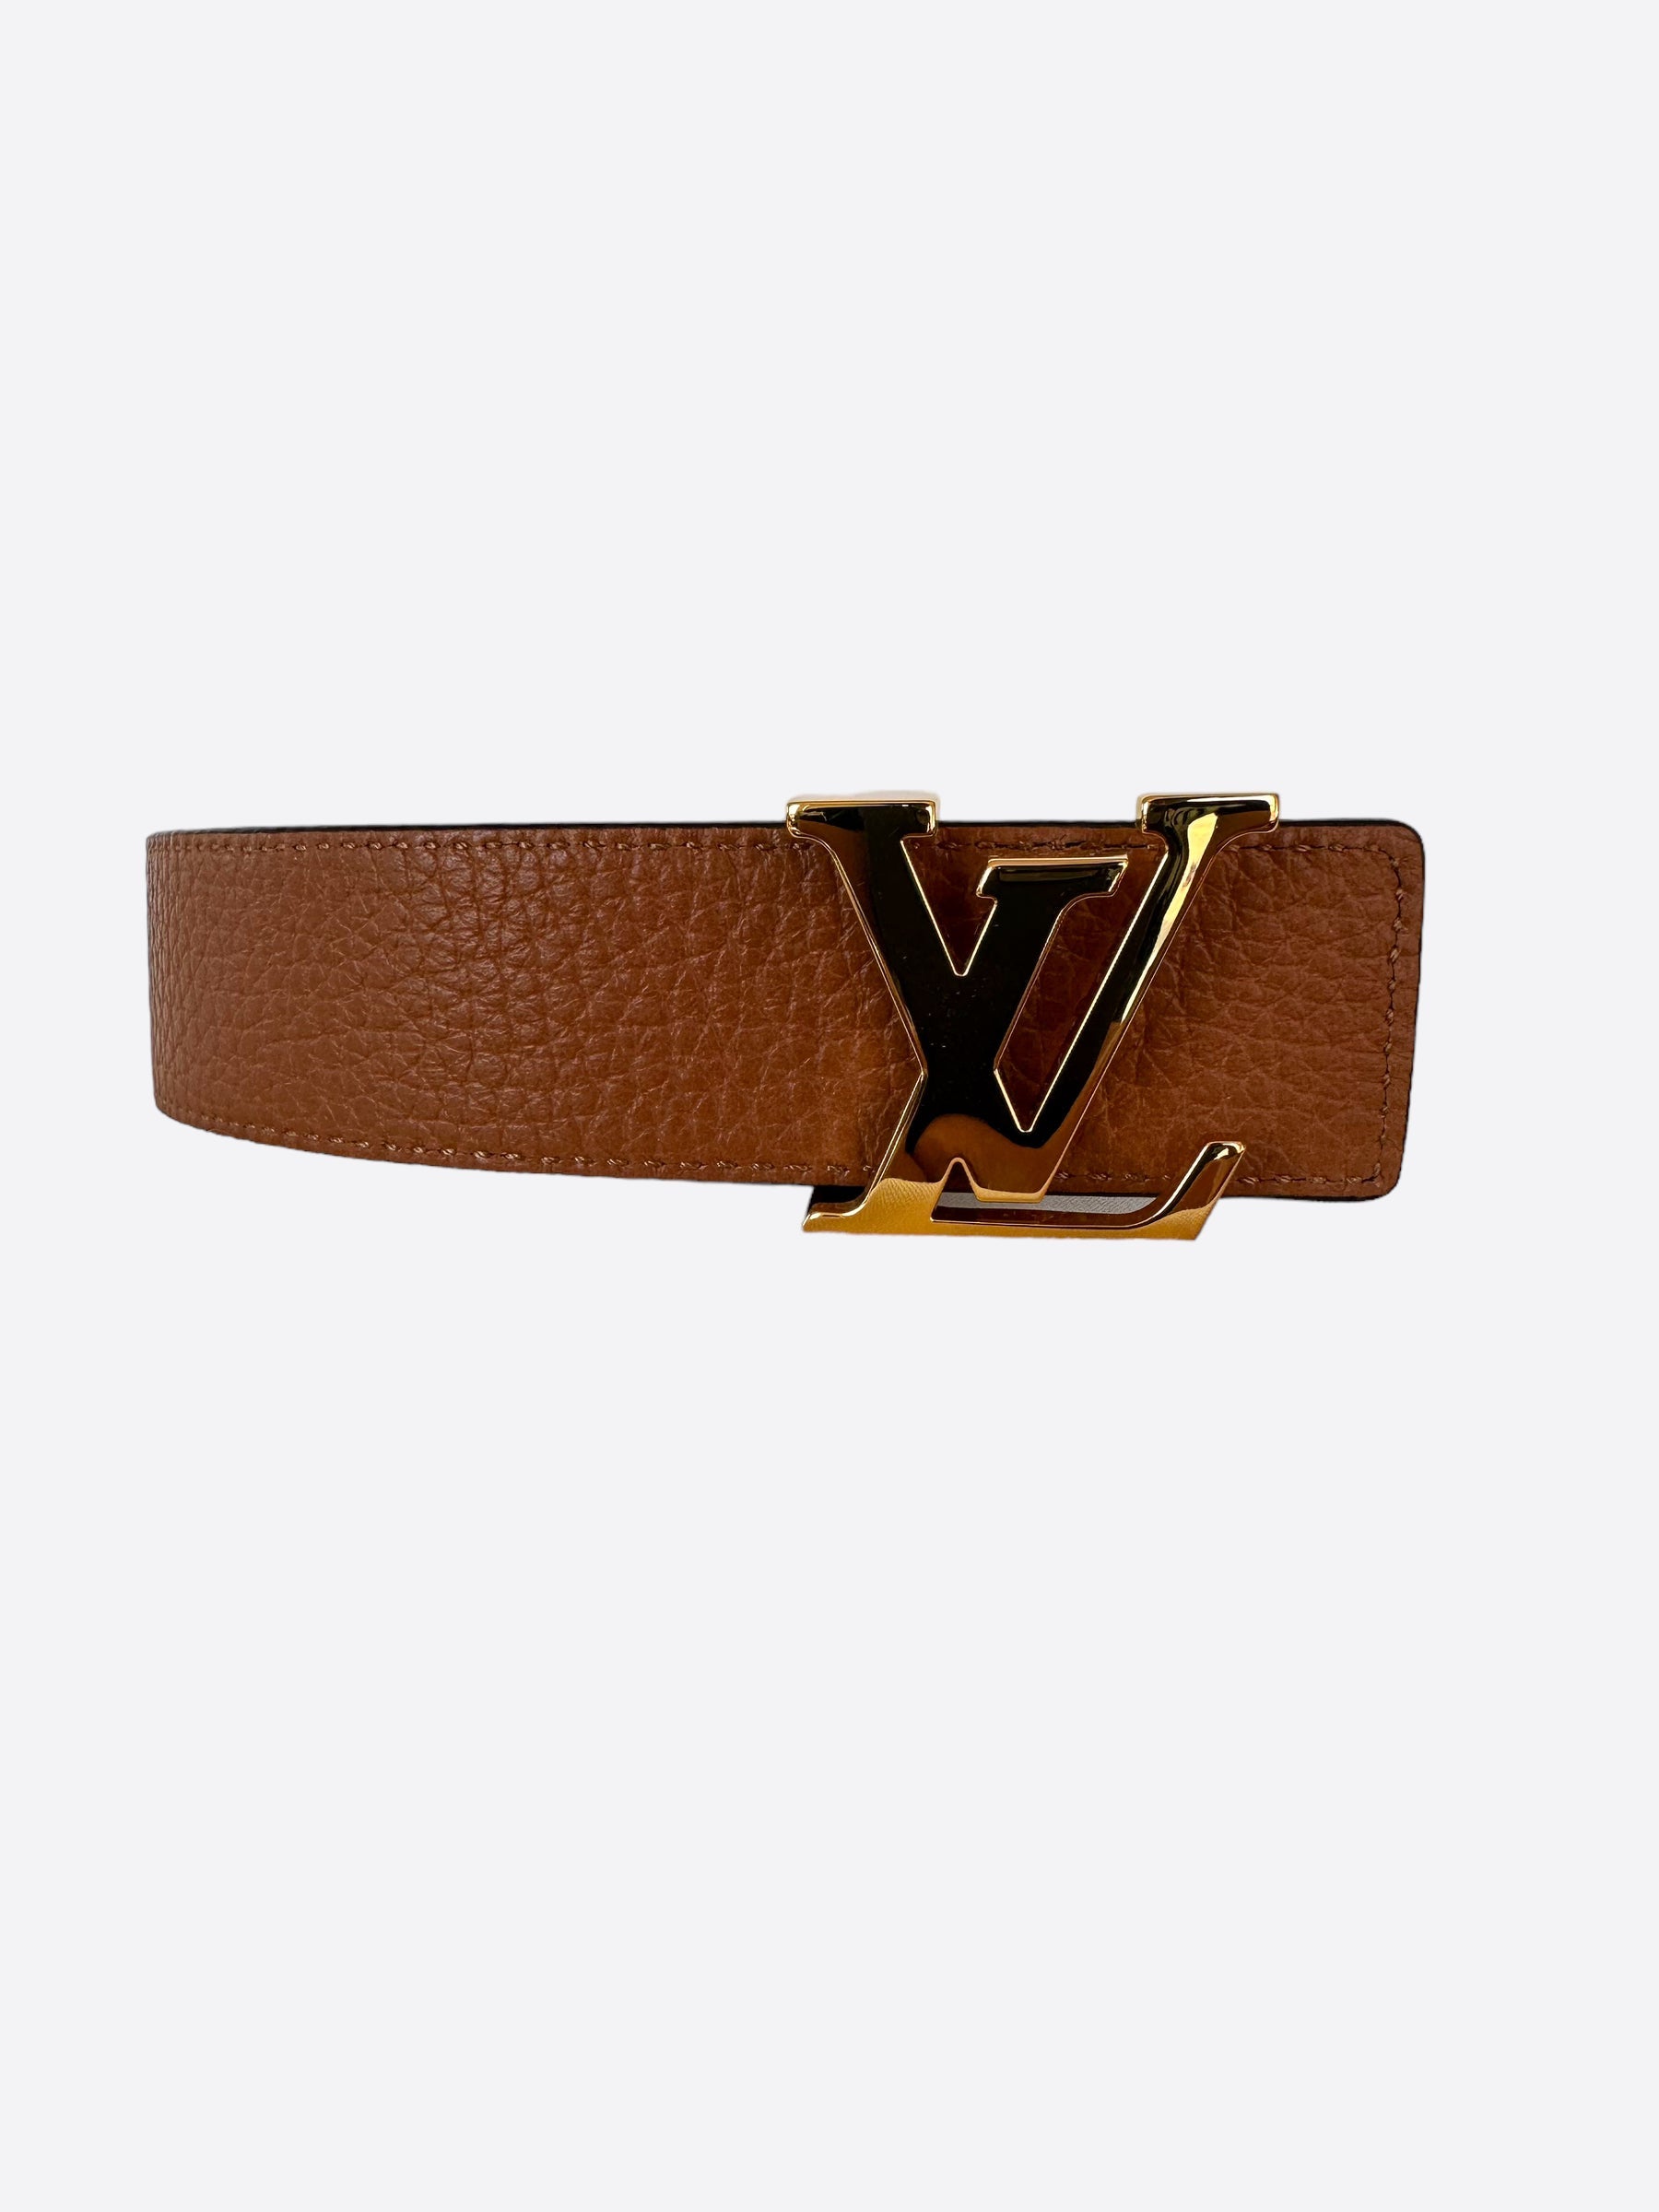 LV Initiales 30mm Reversible Belt Taurillon Leather - Women - Accessories